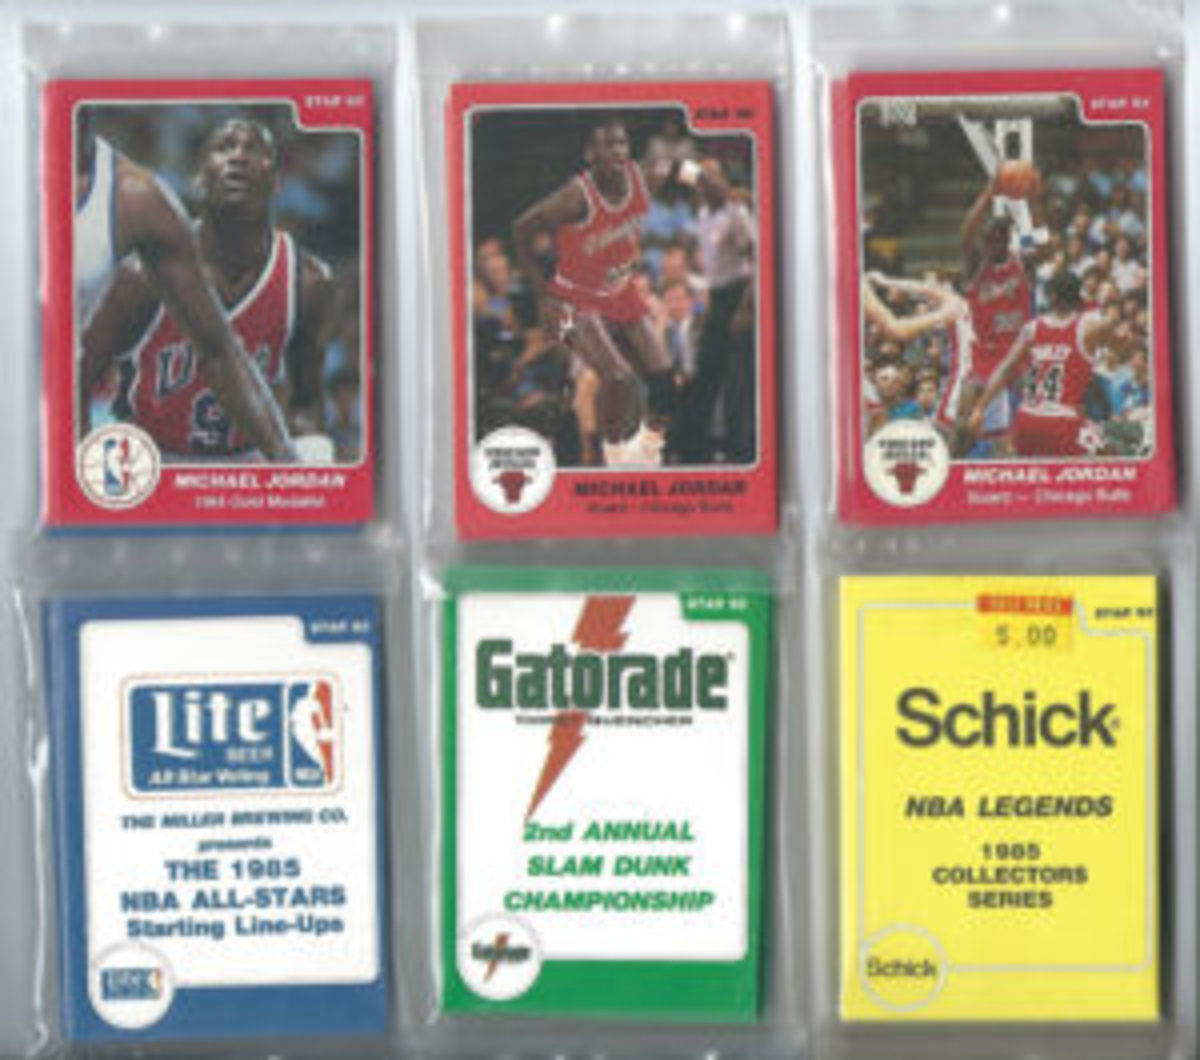  One dilemma a collector faces is whether to remove valuable cards from packs to get them graded.